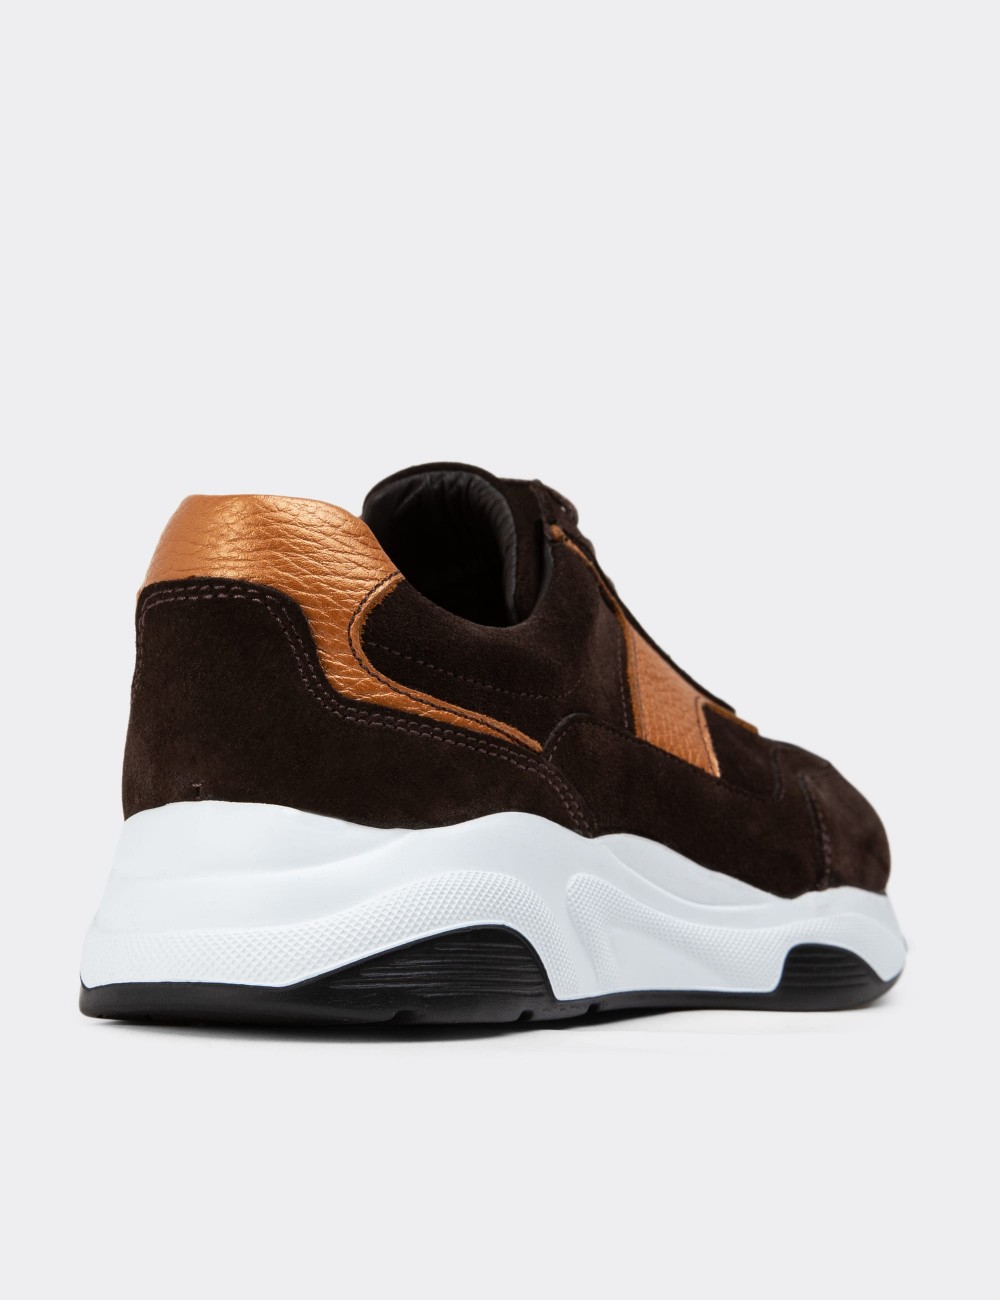 Brown Suede Leather Sneakers - 01890ZKHVE01